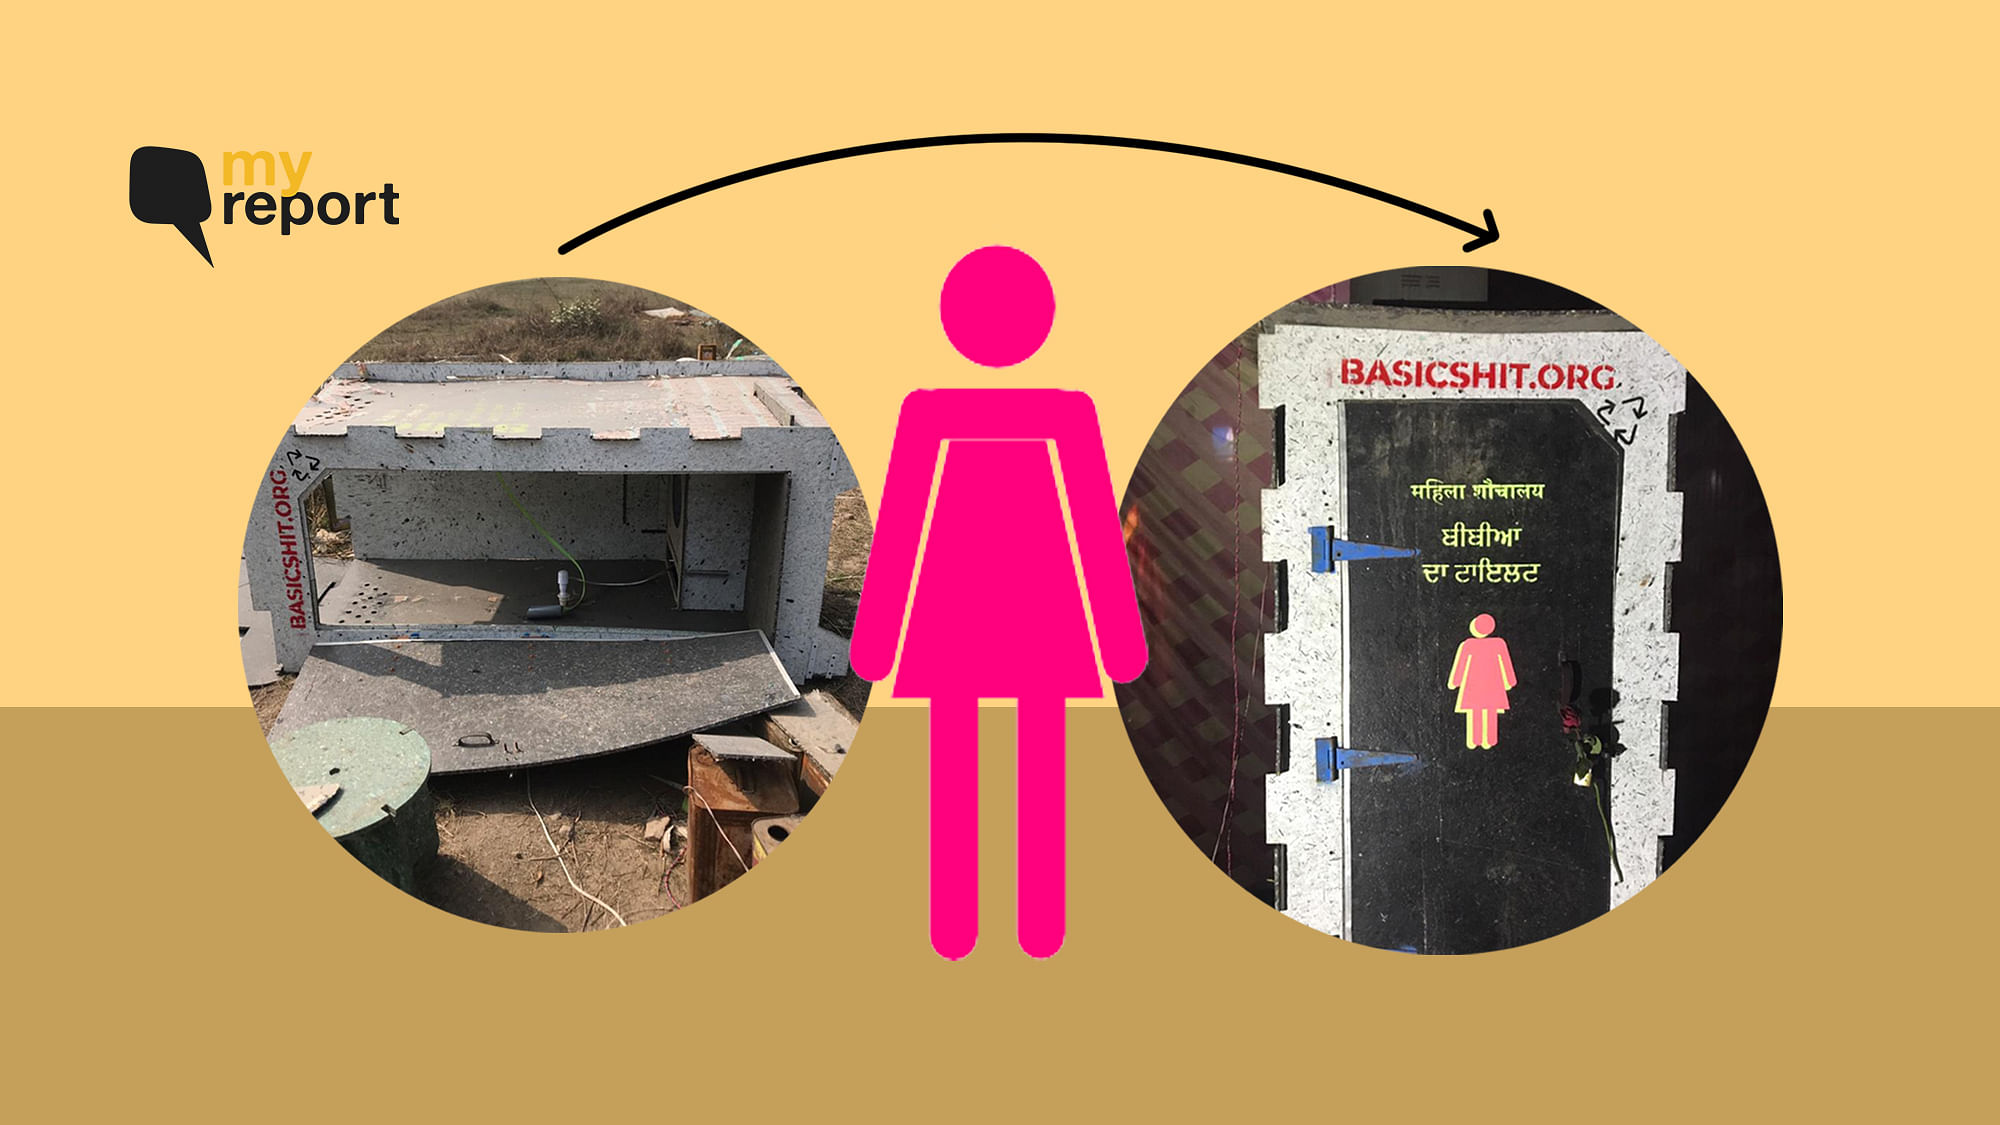 On 14 February, a new toilet was set up for women at the Singhu border.